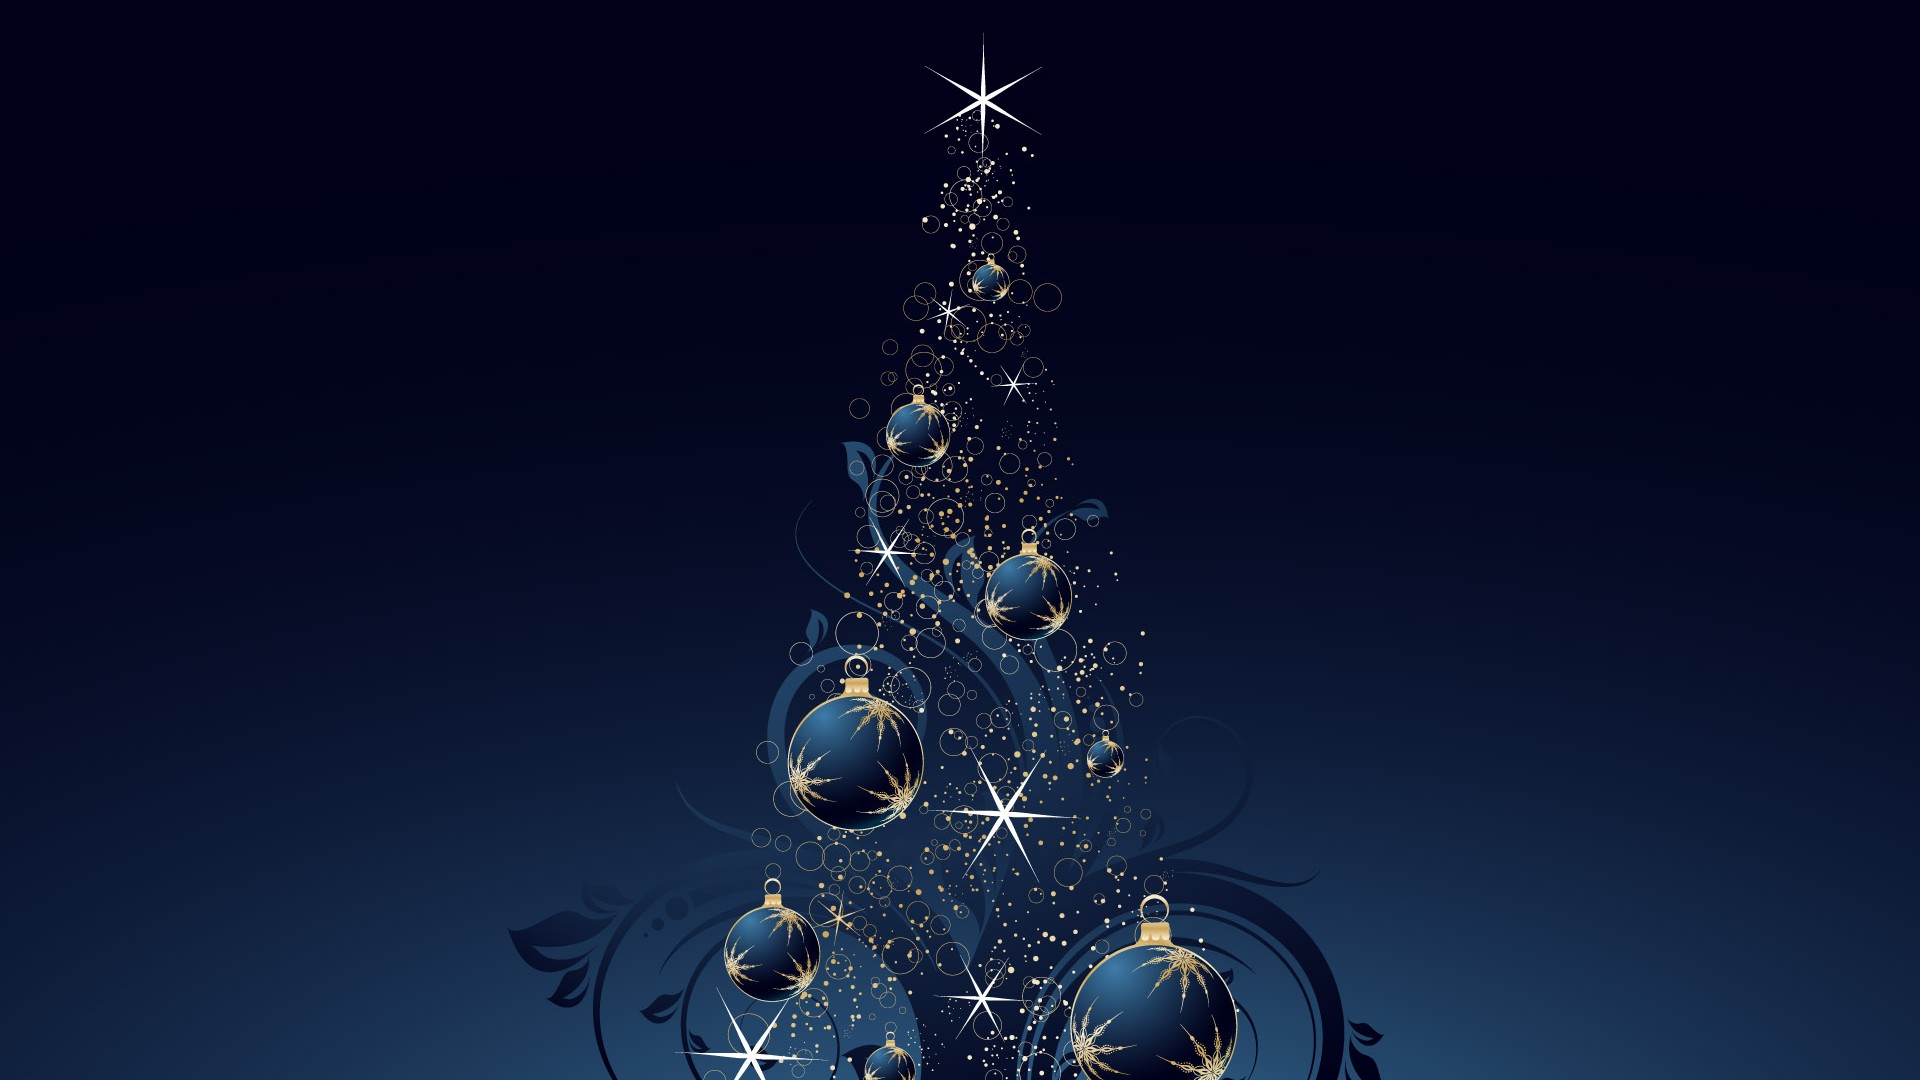 Exquisite Christmas Theme HD Wallpapers #37 - 1920x1080